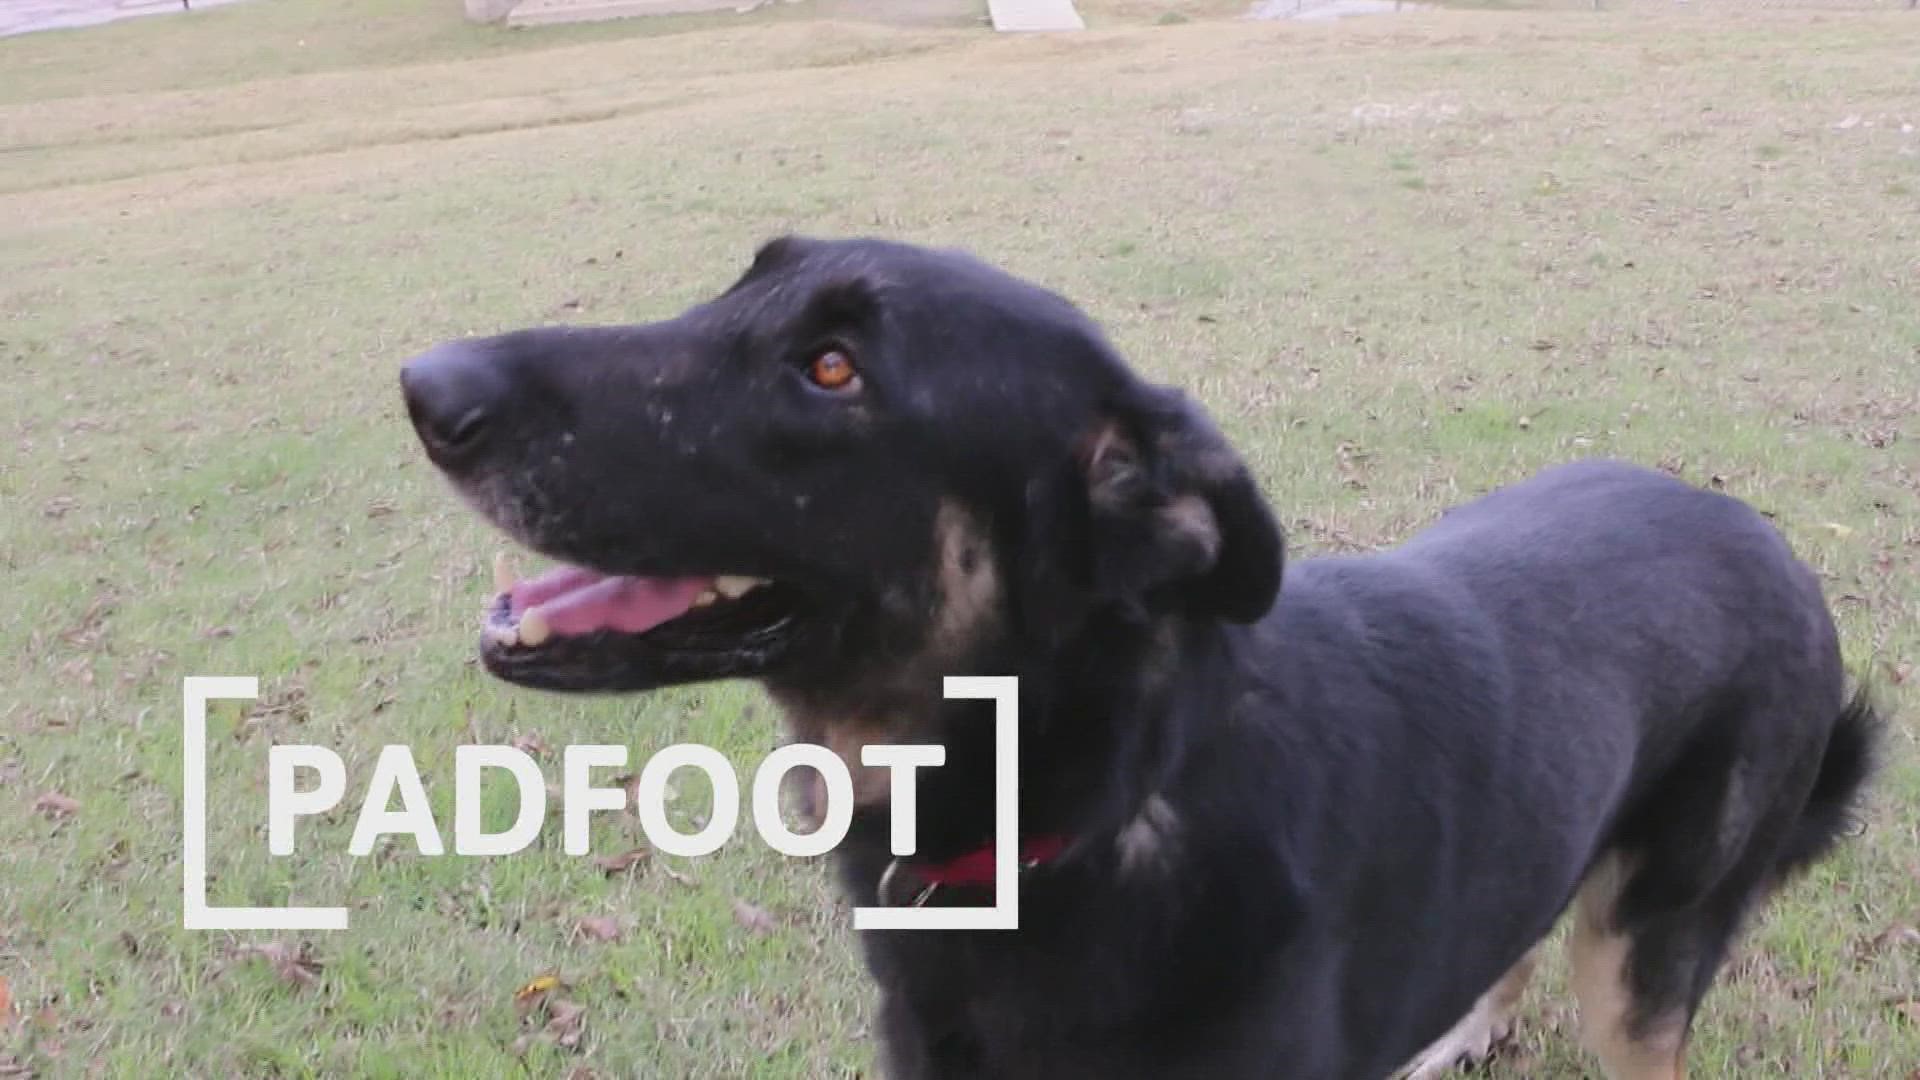 Padfoot is looking for her fur-ever home!